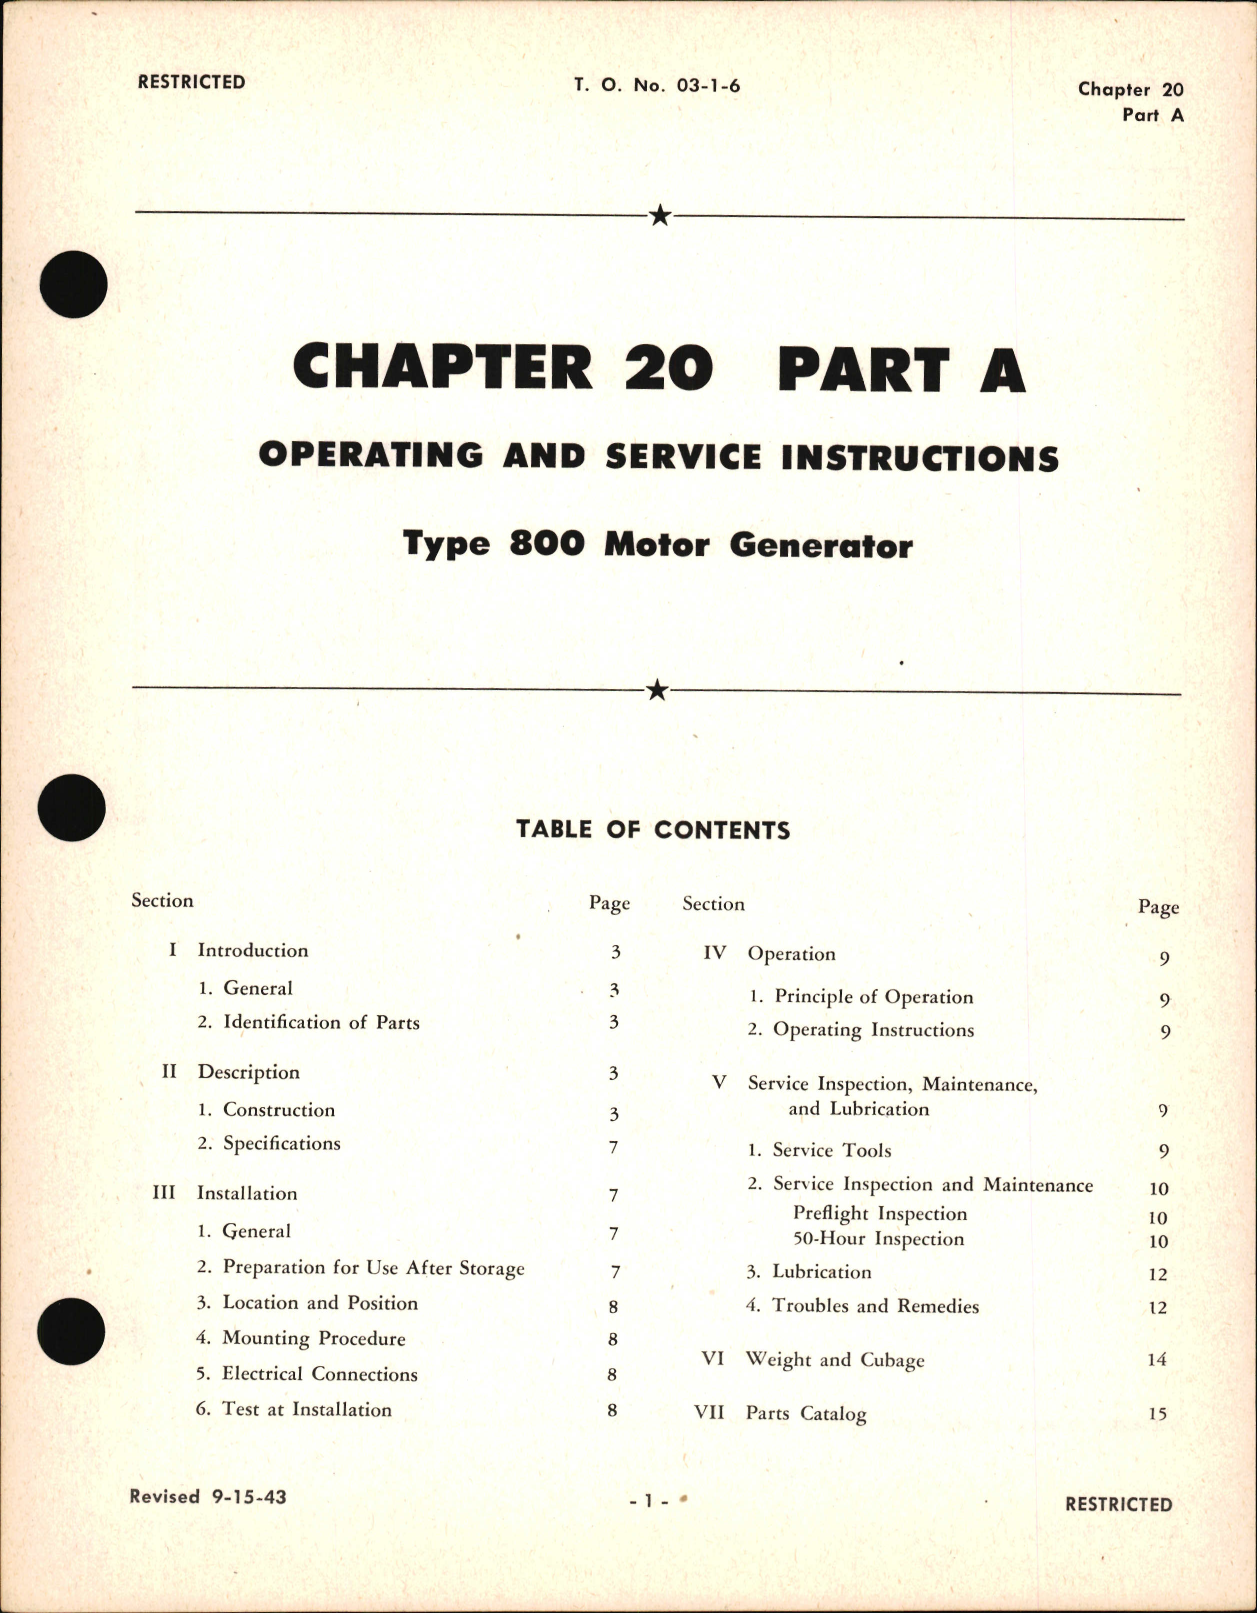 Sample page 1 from AirCorps Library document: Operating and Service Instructions for Type 800 Motor Generator